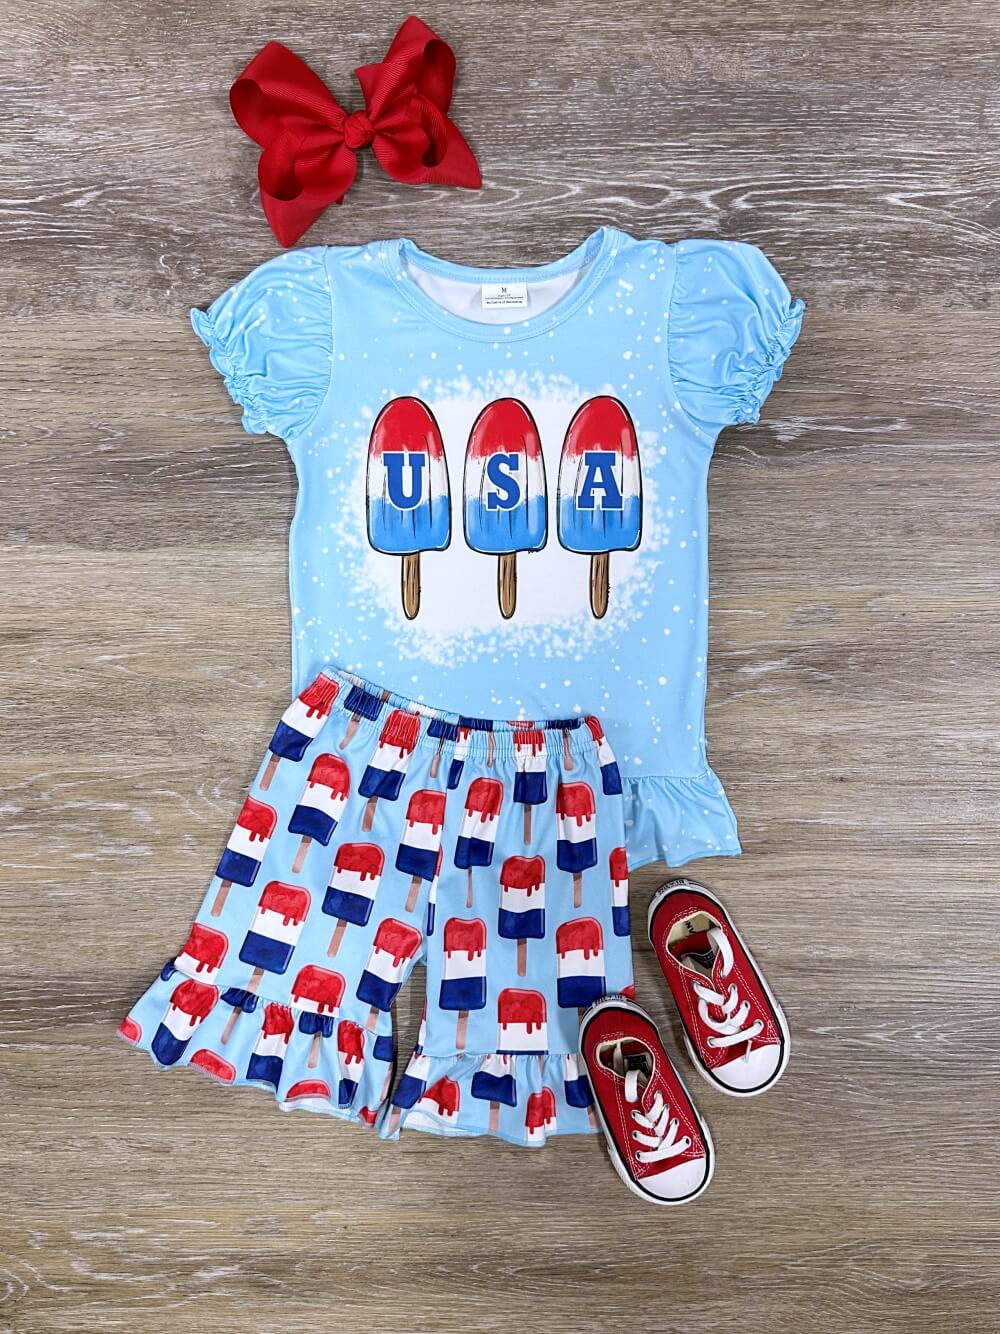 USA Bomb Pop Puff Sleeve Girls Patriotic Shorts Outfit